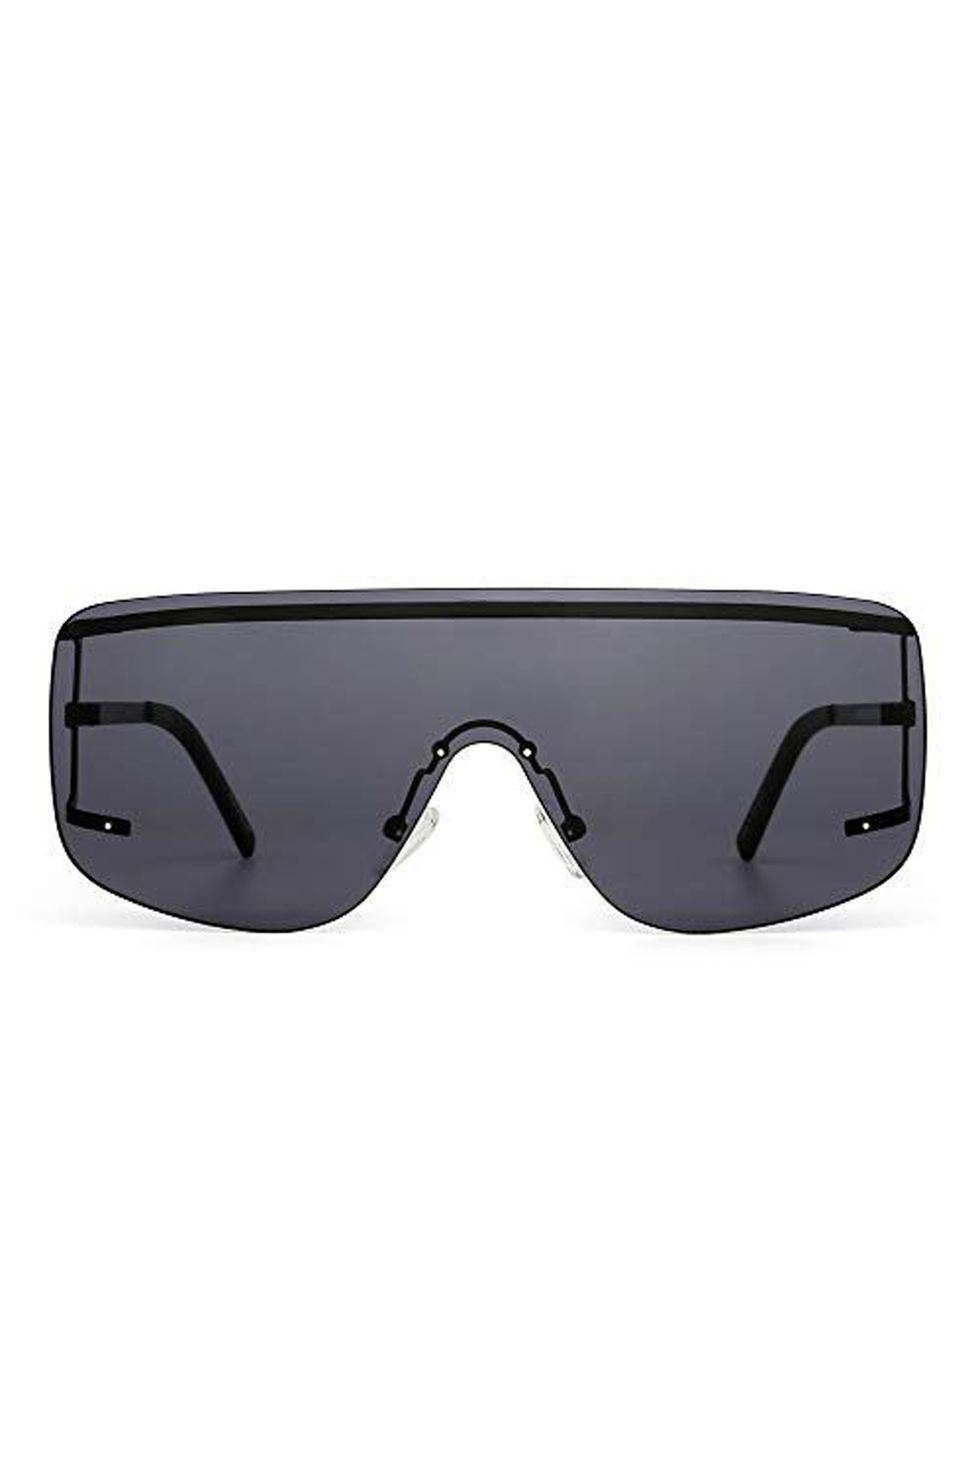 stabil romantisk etik 20 Types of Sunglasses — Different Sunglass Shapes and Styles